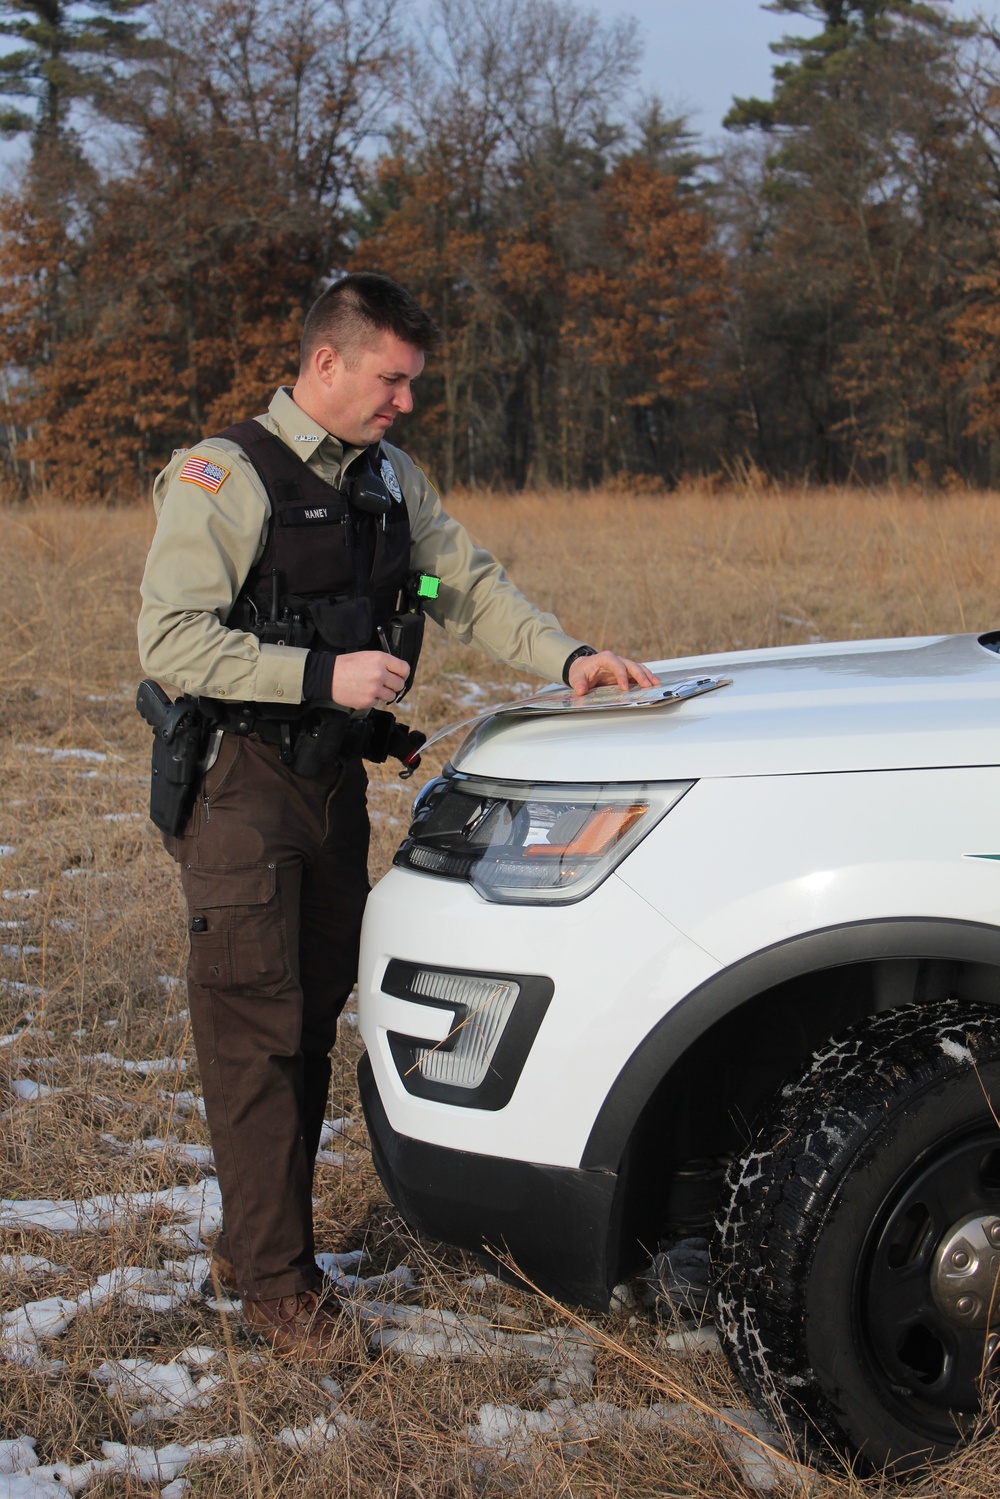 New game wardens support Fort McCoy Police Department